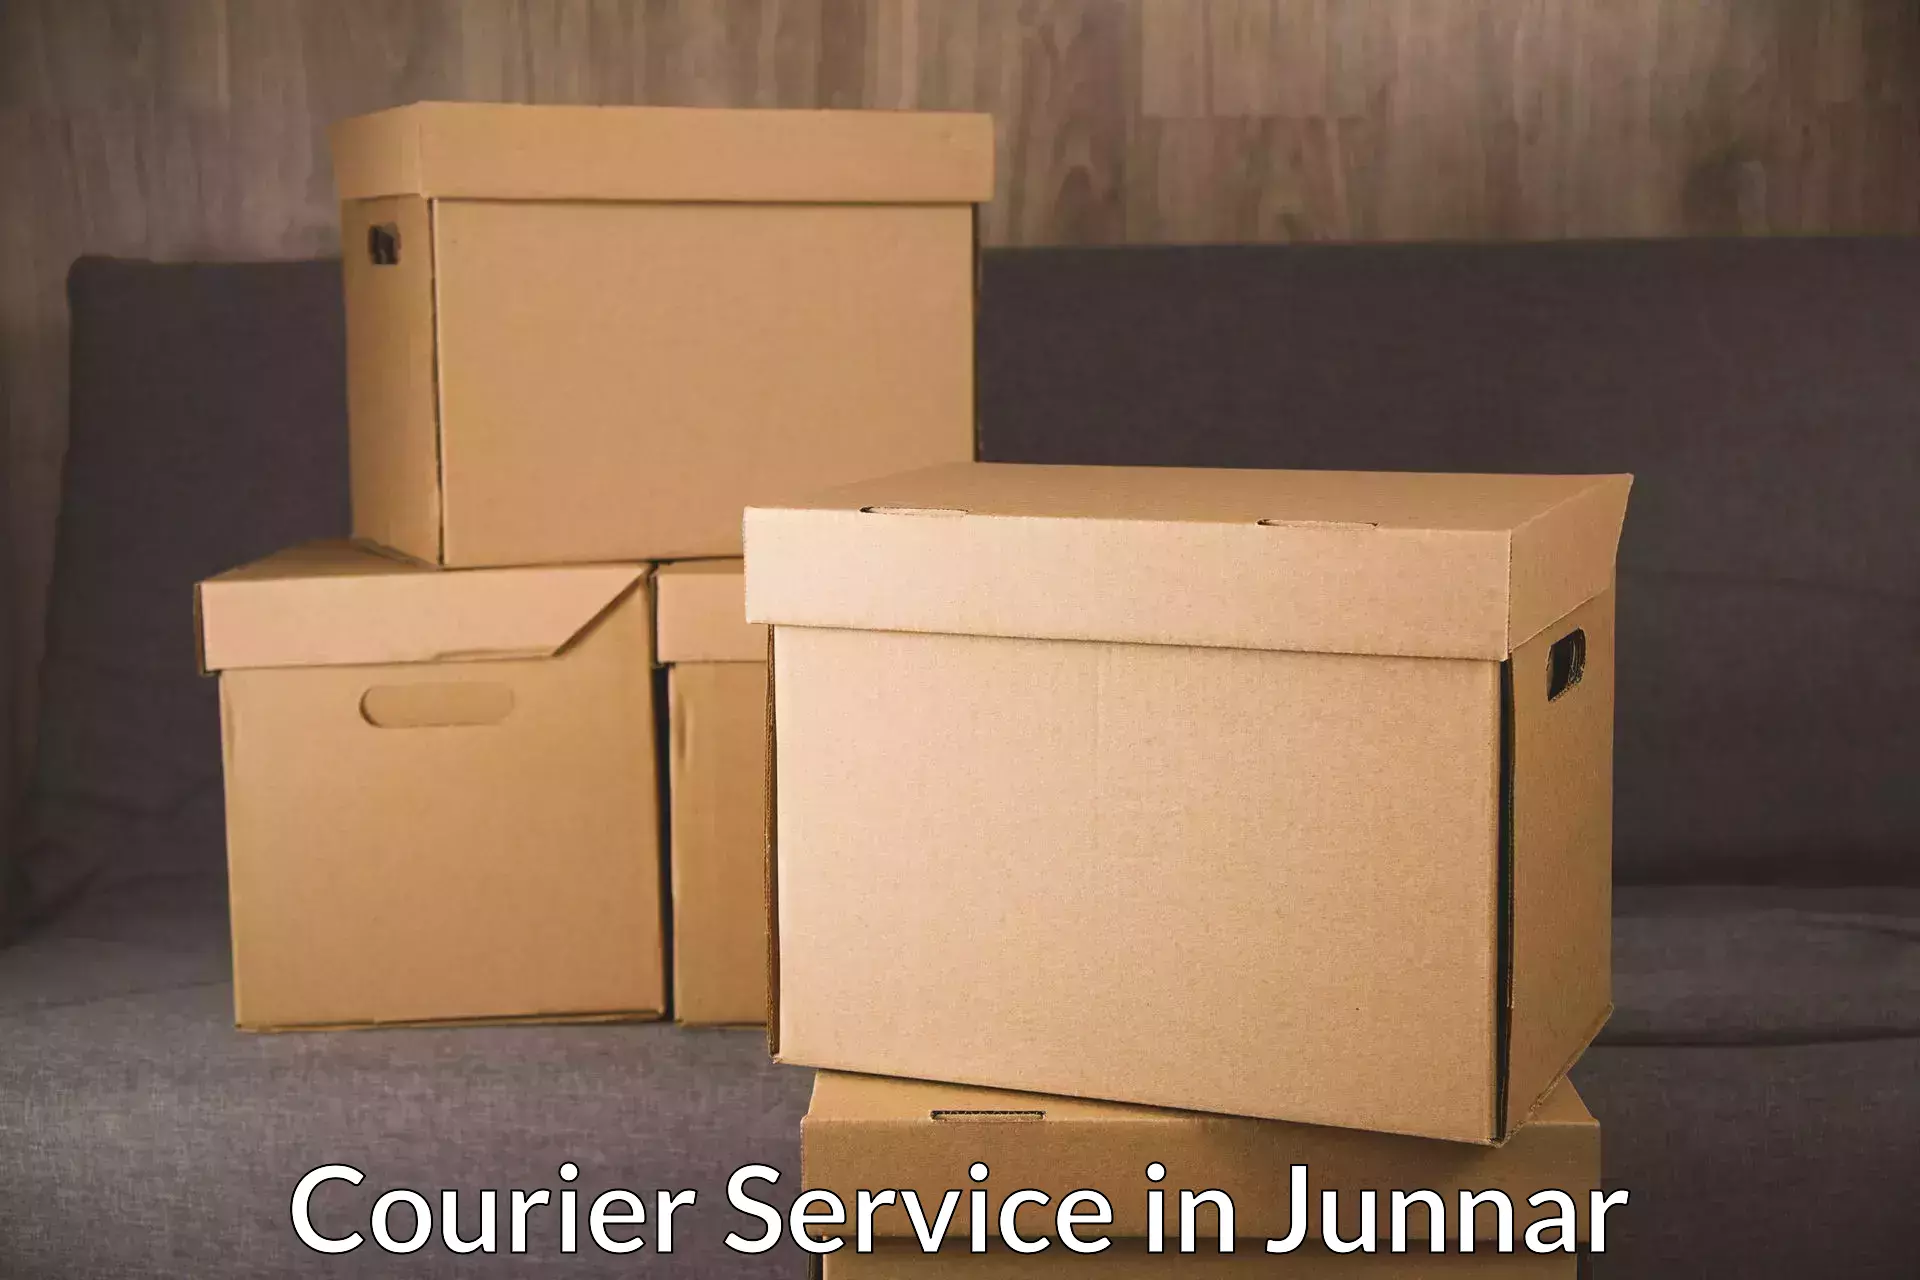 Efficient parcel tracking in Junnar